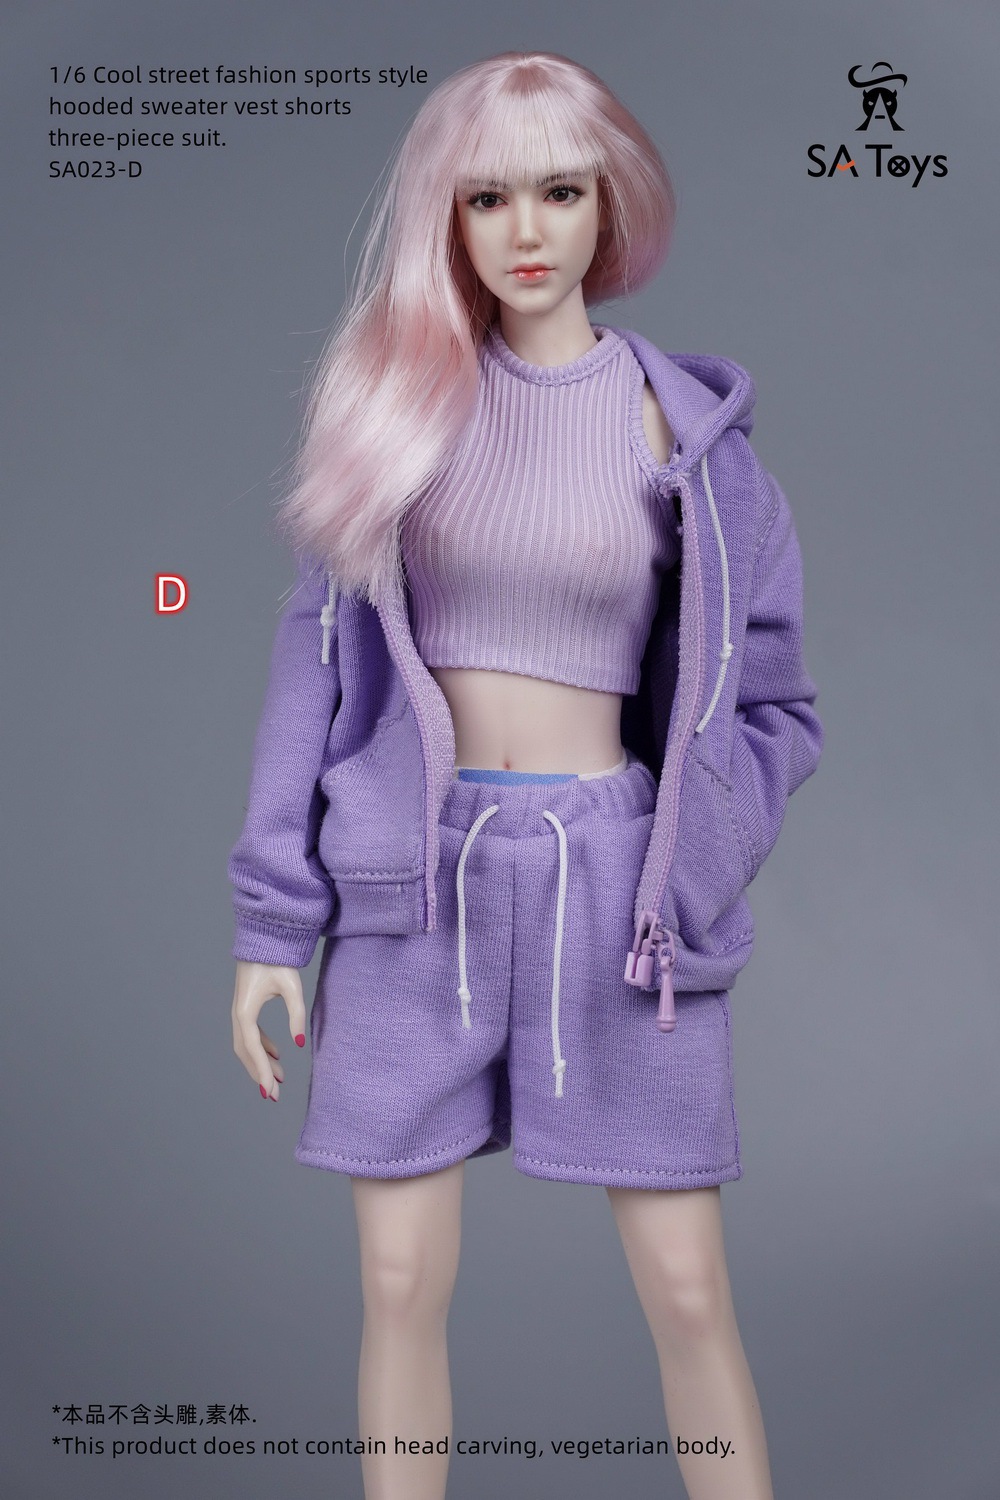 hipskirt - NEW PRODUCT: SA Toys: 1/6 hip skirt / floral elastic skirt / fashionable sports style hooded sweater cover, hip-hop fisherman hat halter and footwear casual pants [variety optional] 17020310